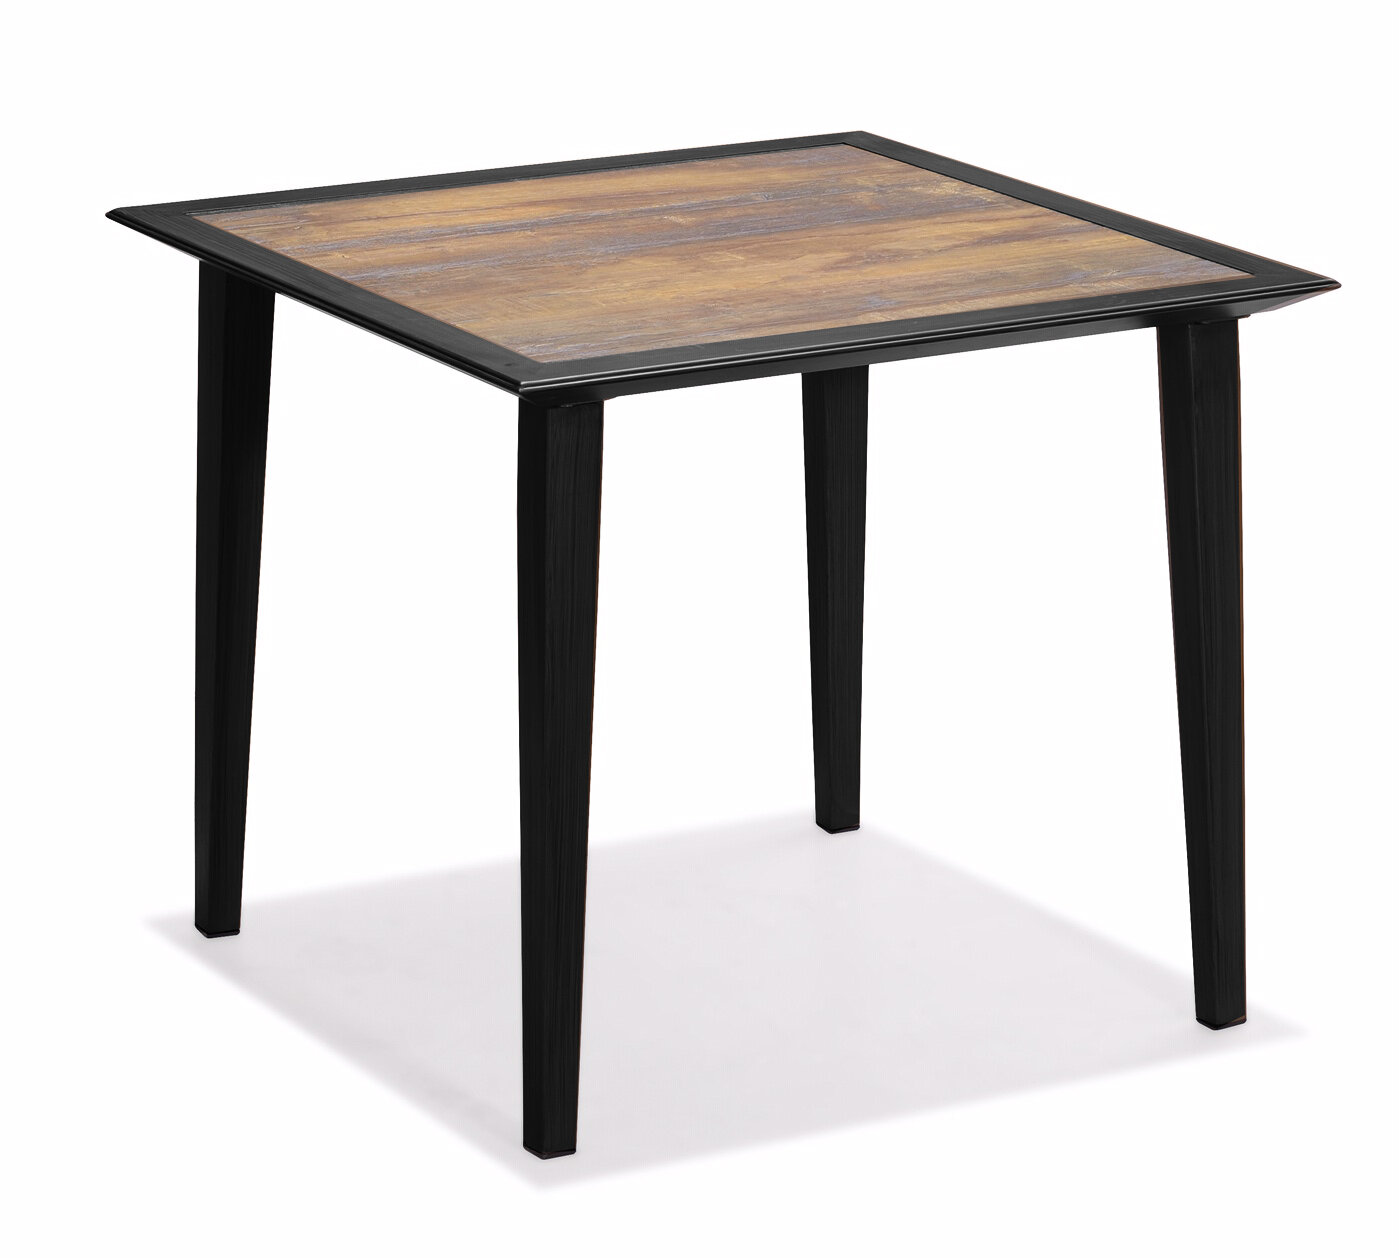 PACIFIC SQUARE DINING TABLE